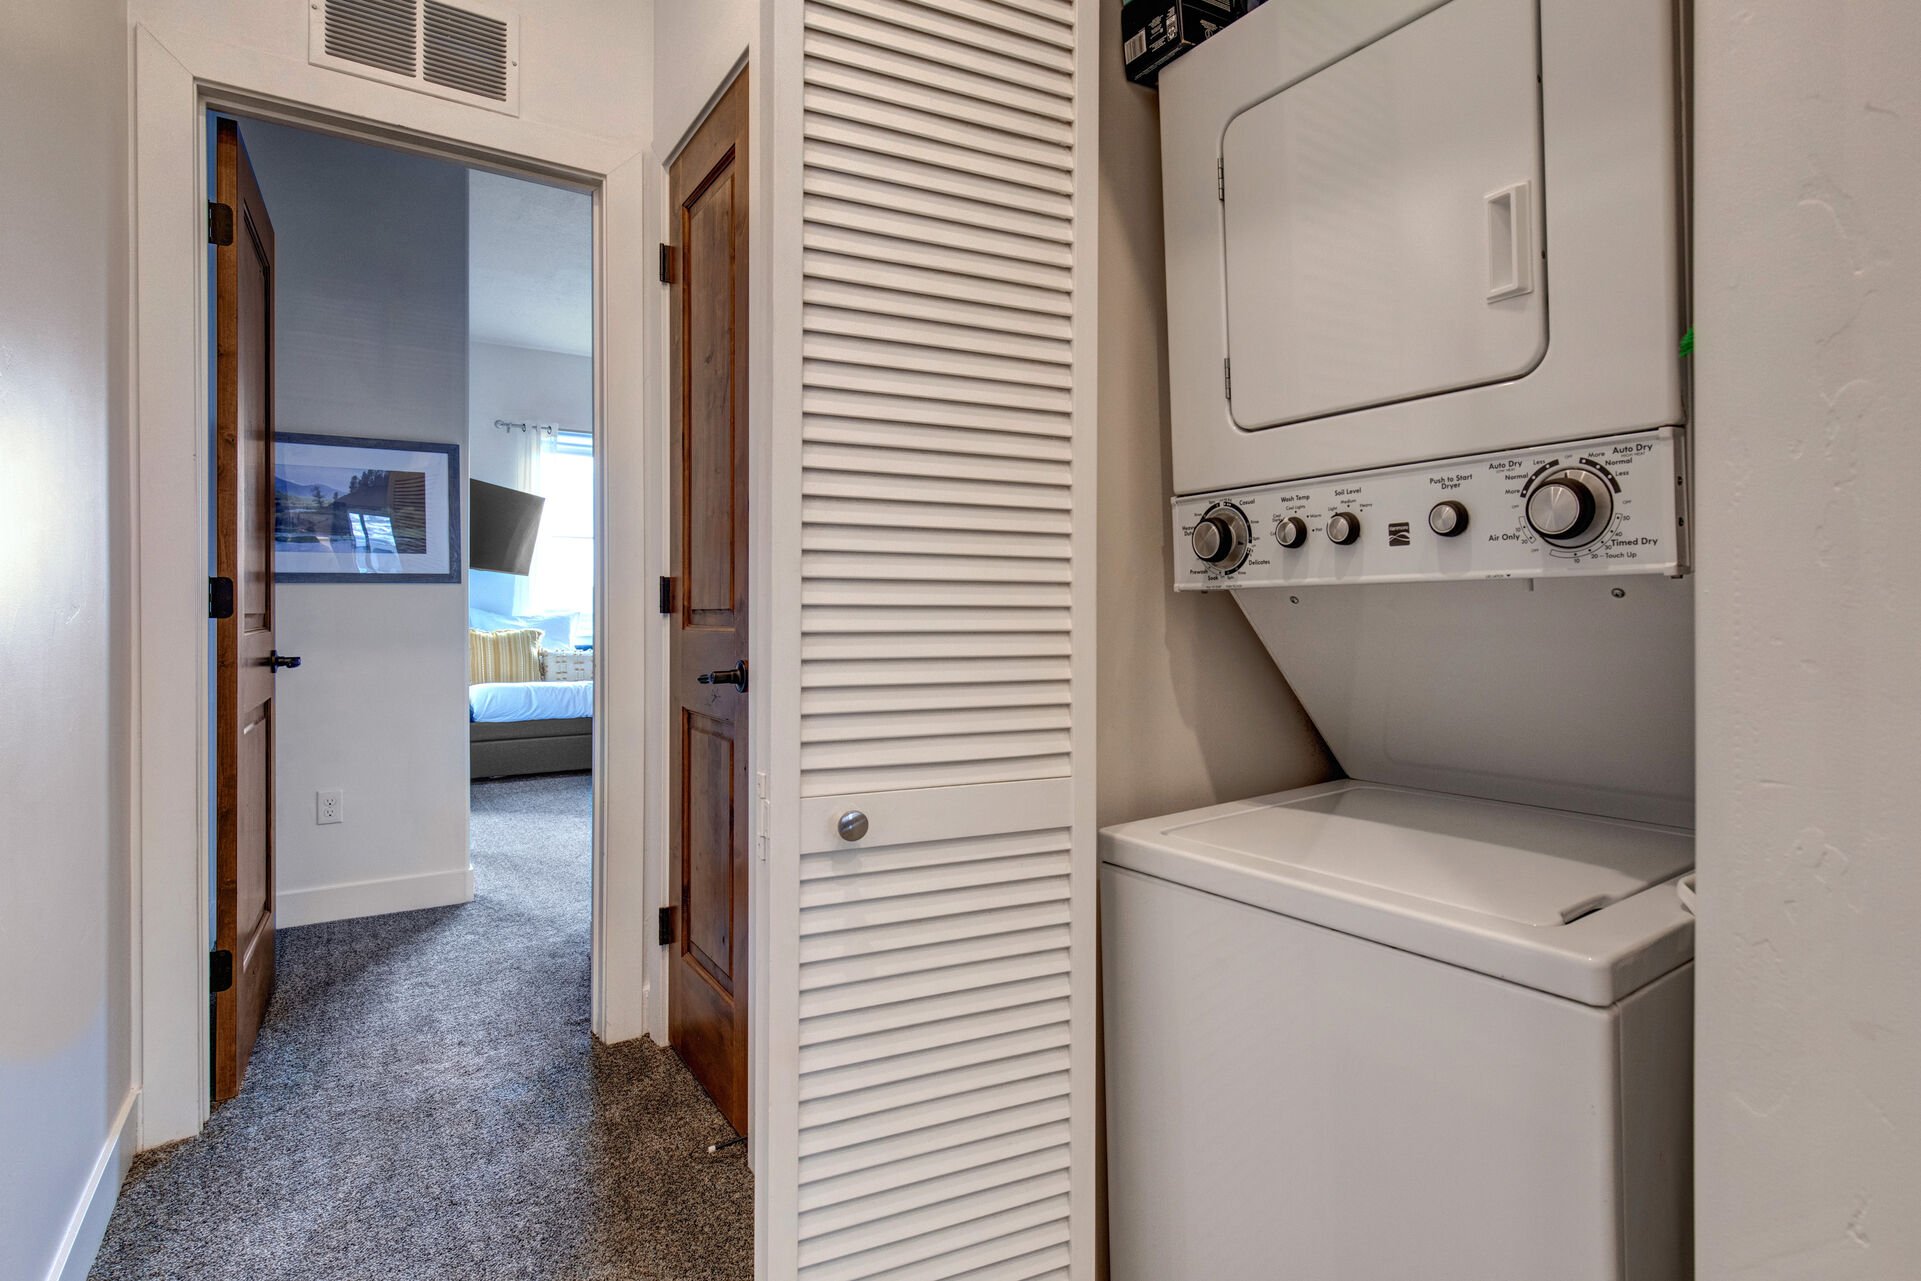 Private Washer and Dryer units located in upper hallway closet